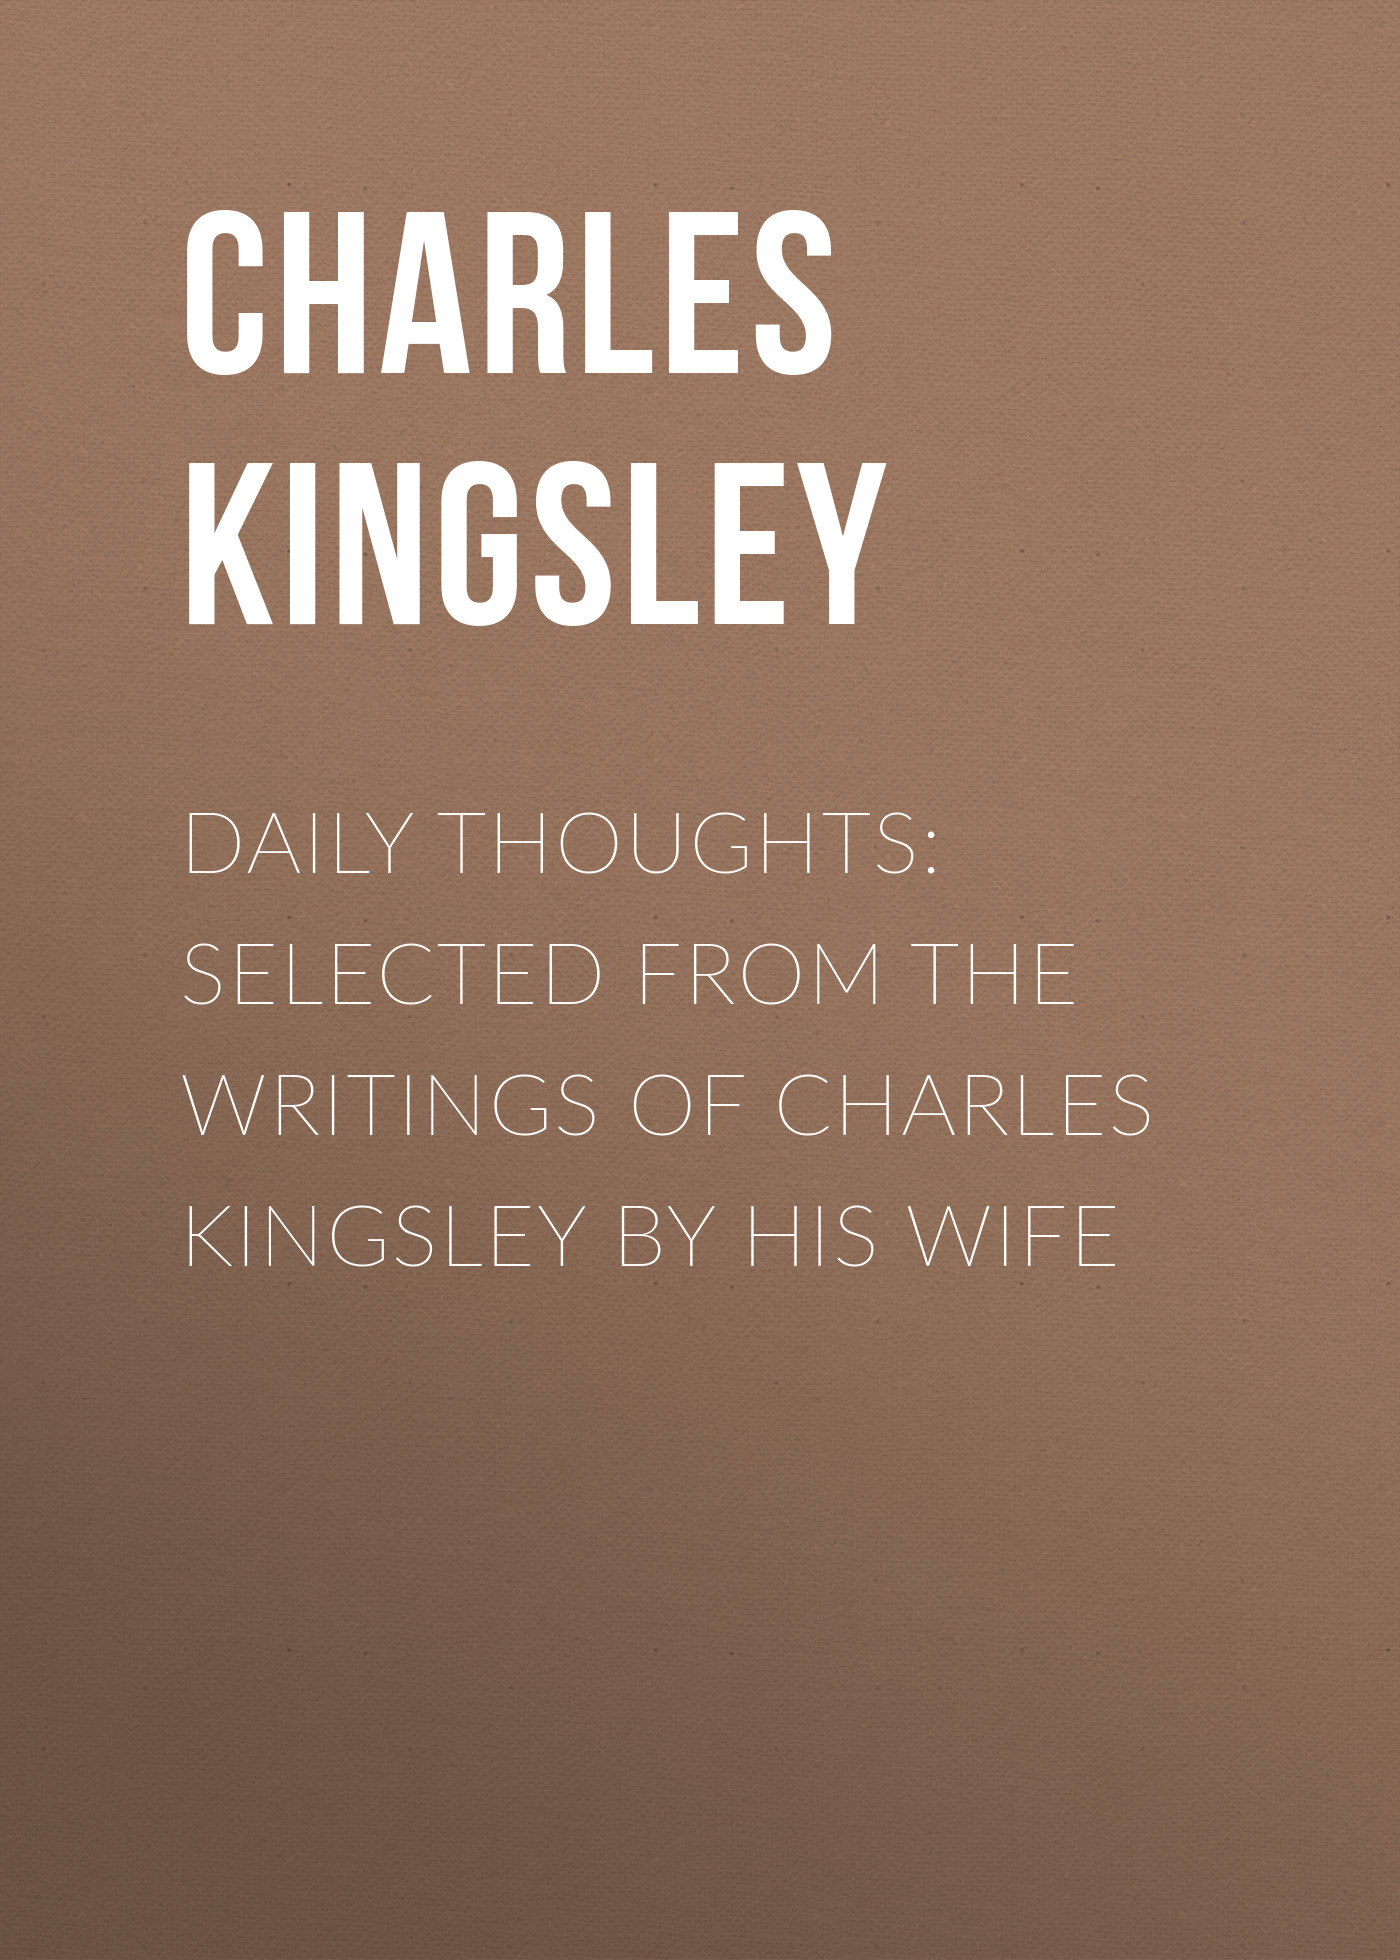 Charles Kingsley Daily Thoughts: selected from the writings of Charles Kingsley by his wife